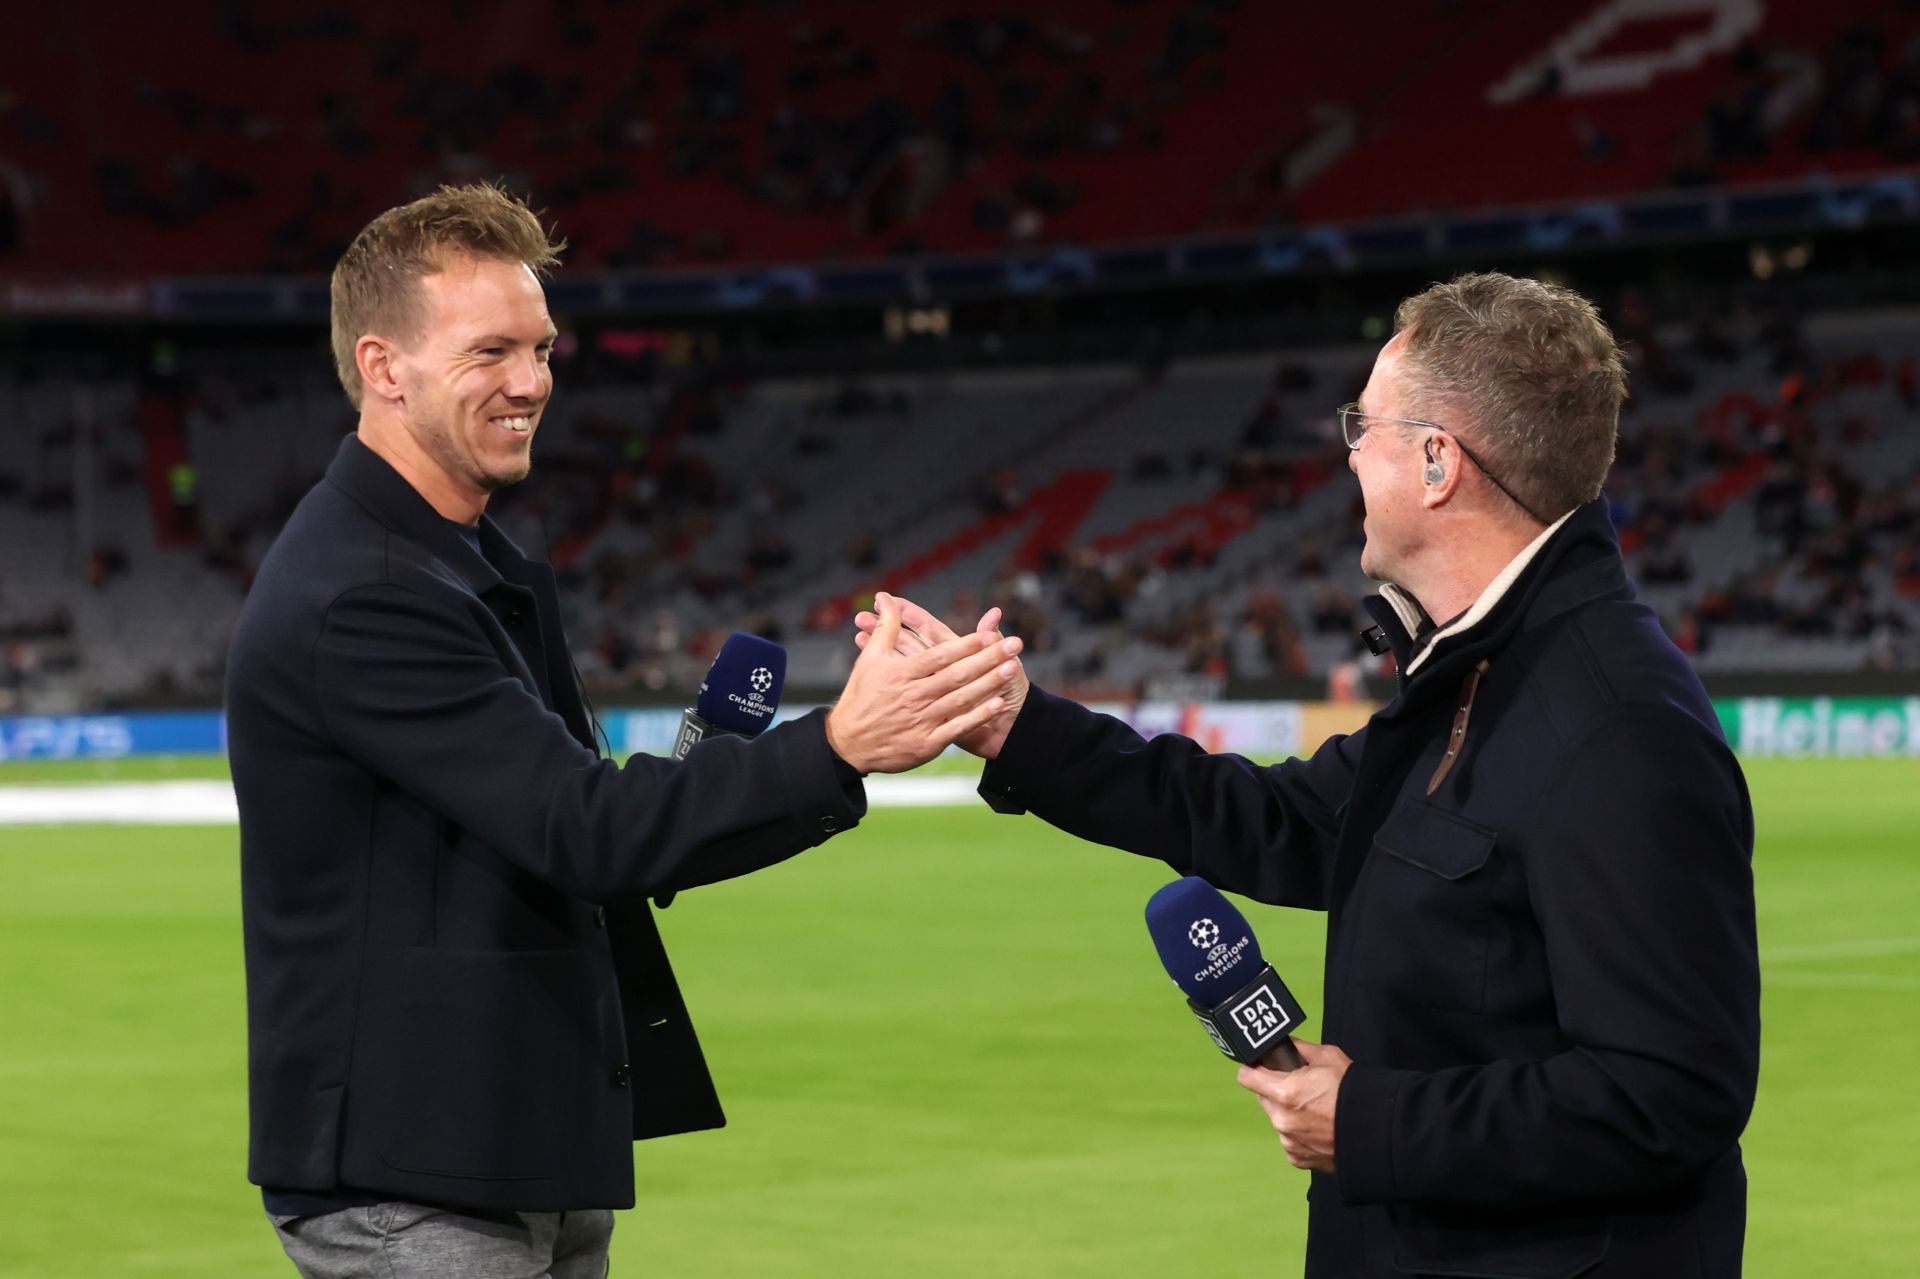 Julian Nagelsmann (L) and Ralf Rangnick (R) have a lot of history together